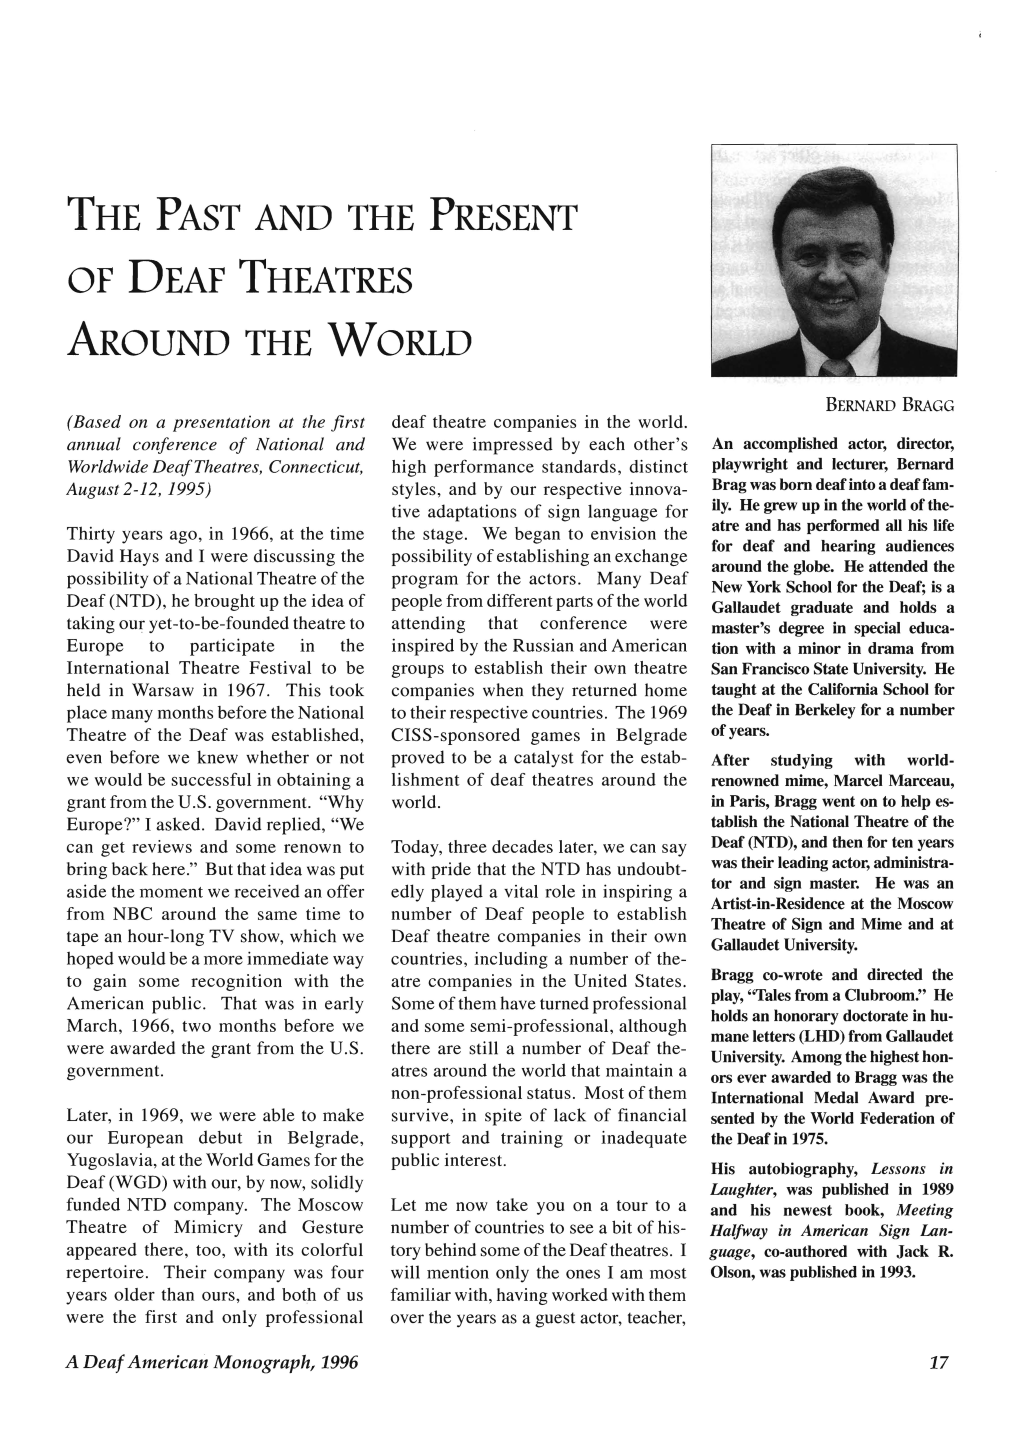 The Past and the Present of Deaf Theatres Around the World